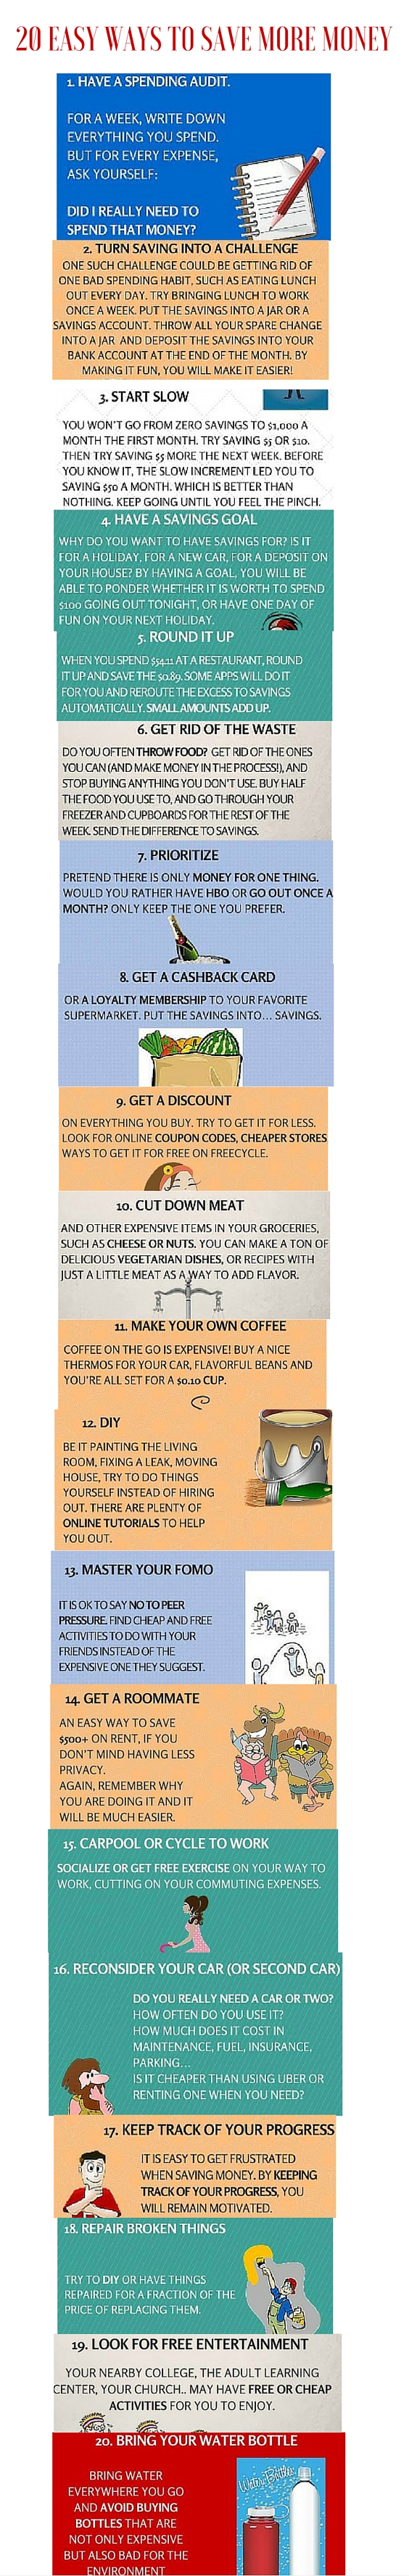 20 EASY WAYS TO SAVE MORE MONEY